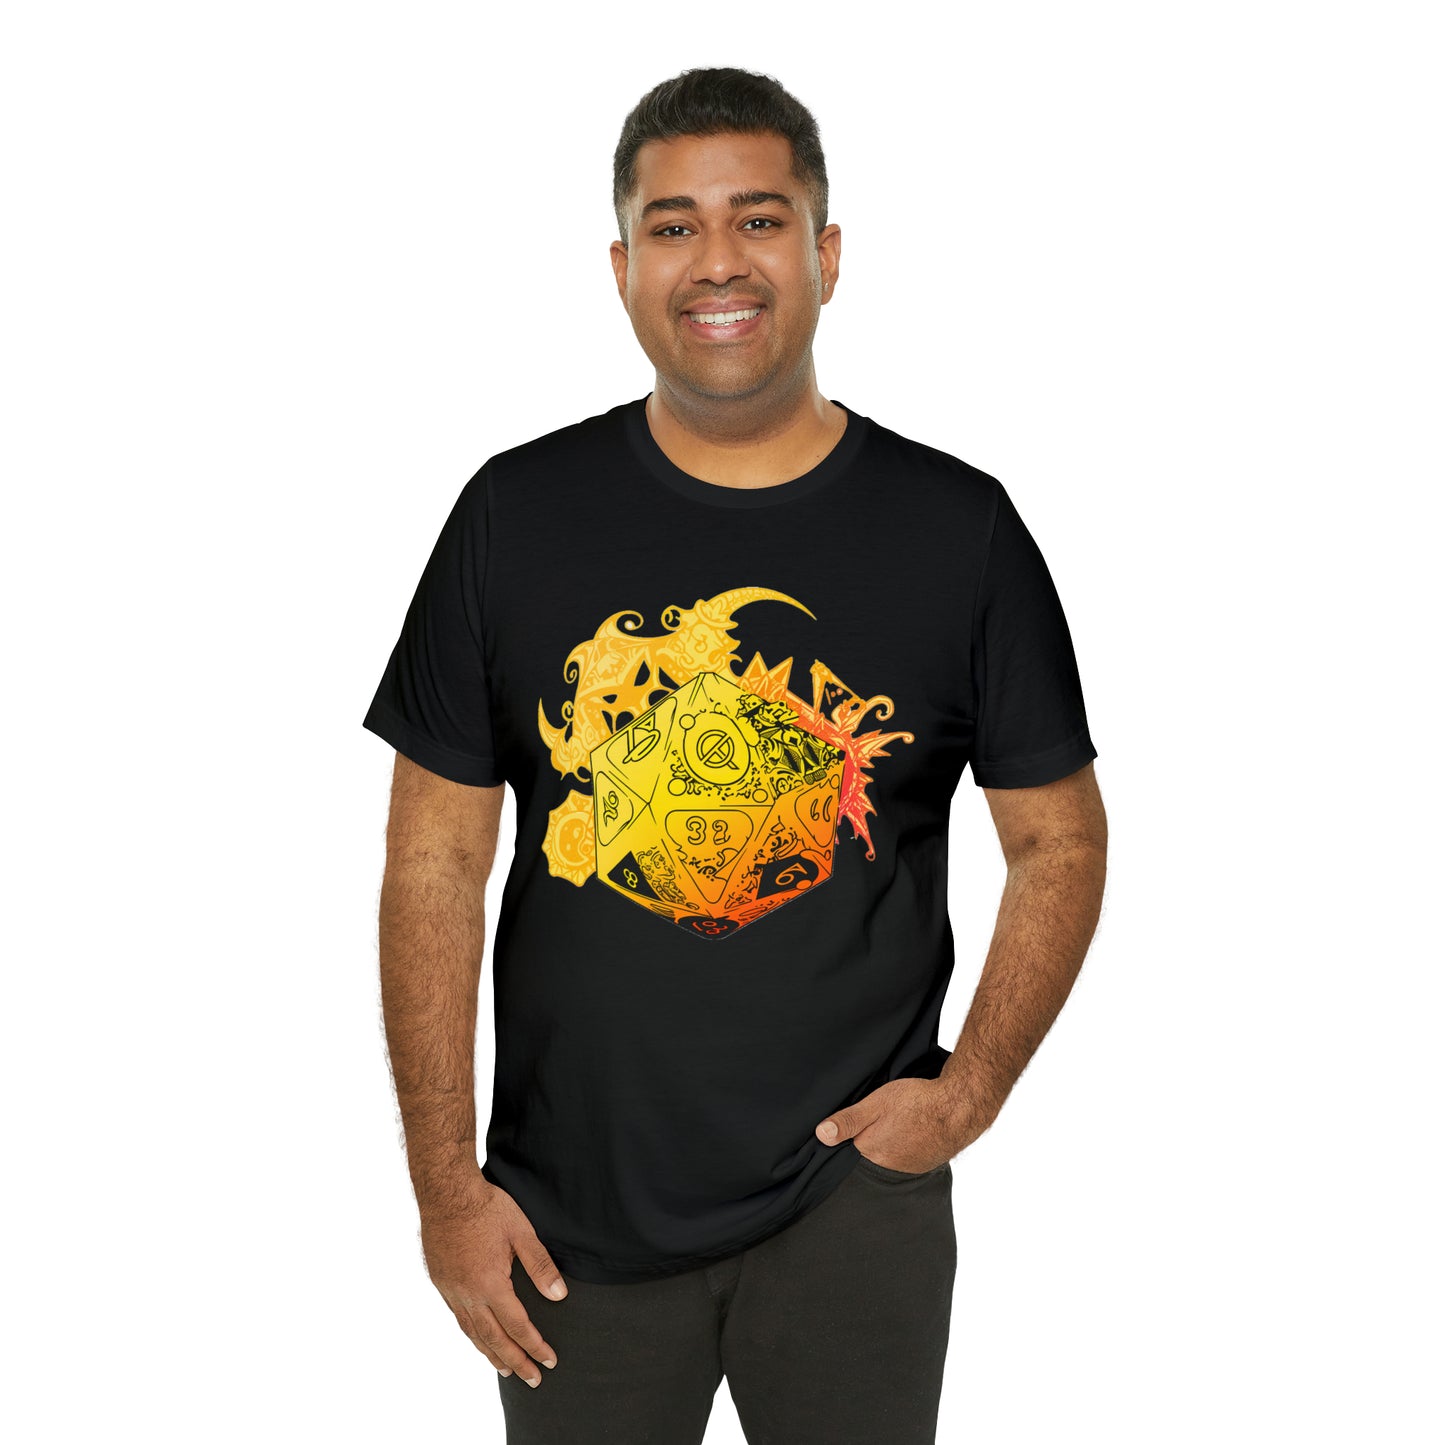 black-quest-thread-tee-shirt-with-large-yellow-dragon-dice-on-center-of-shirt